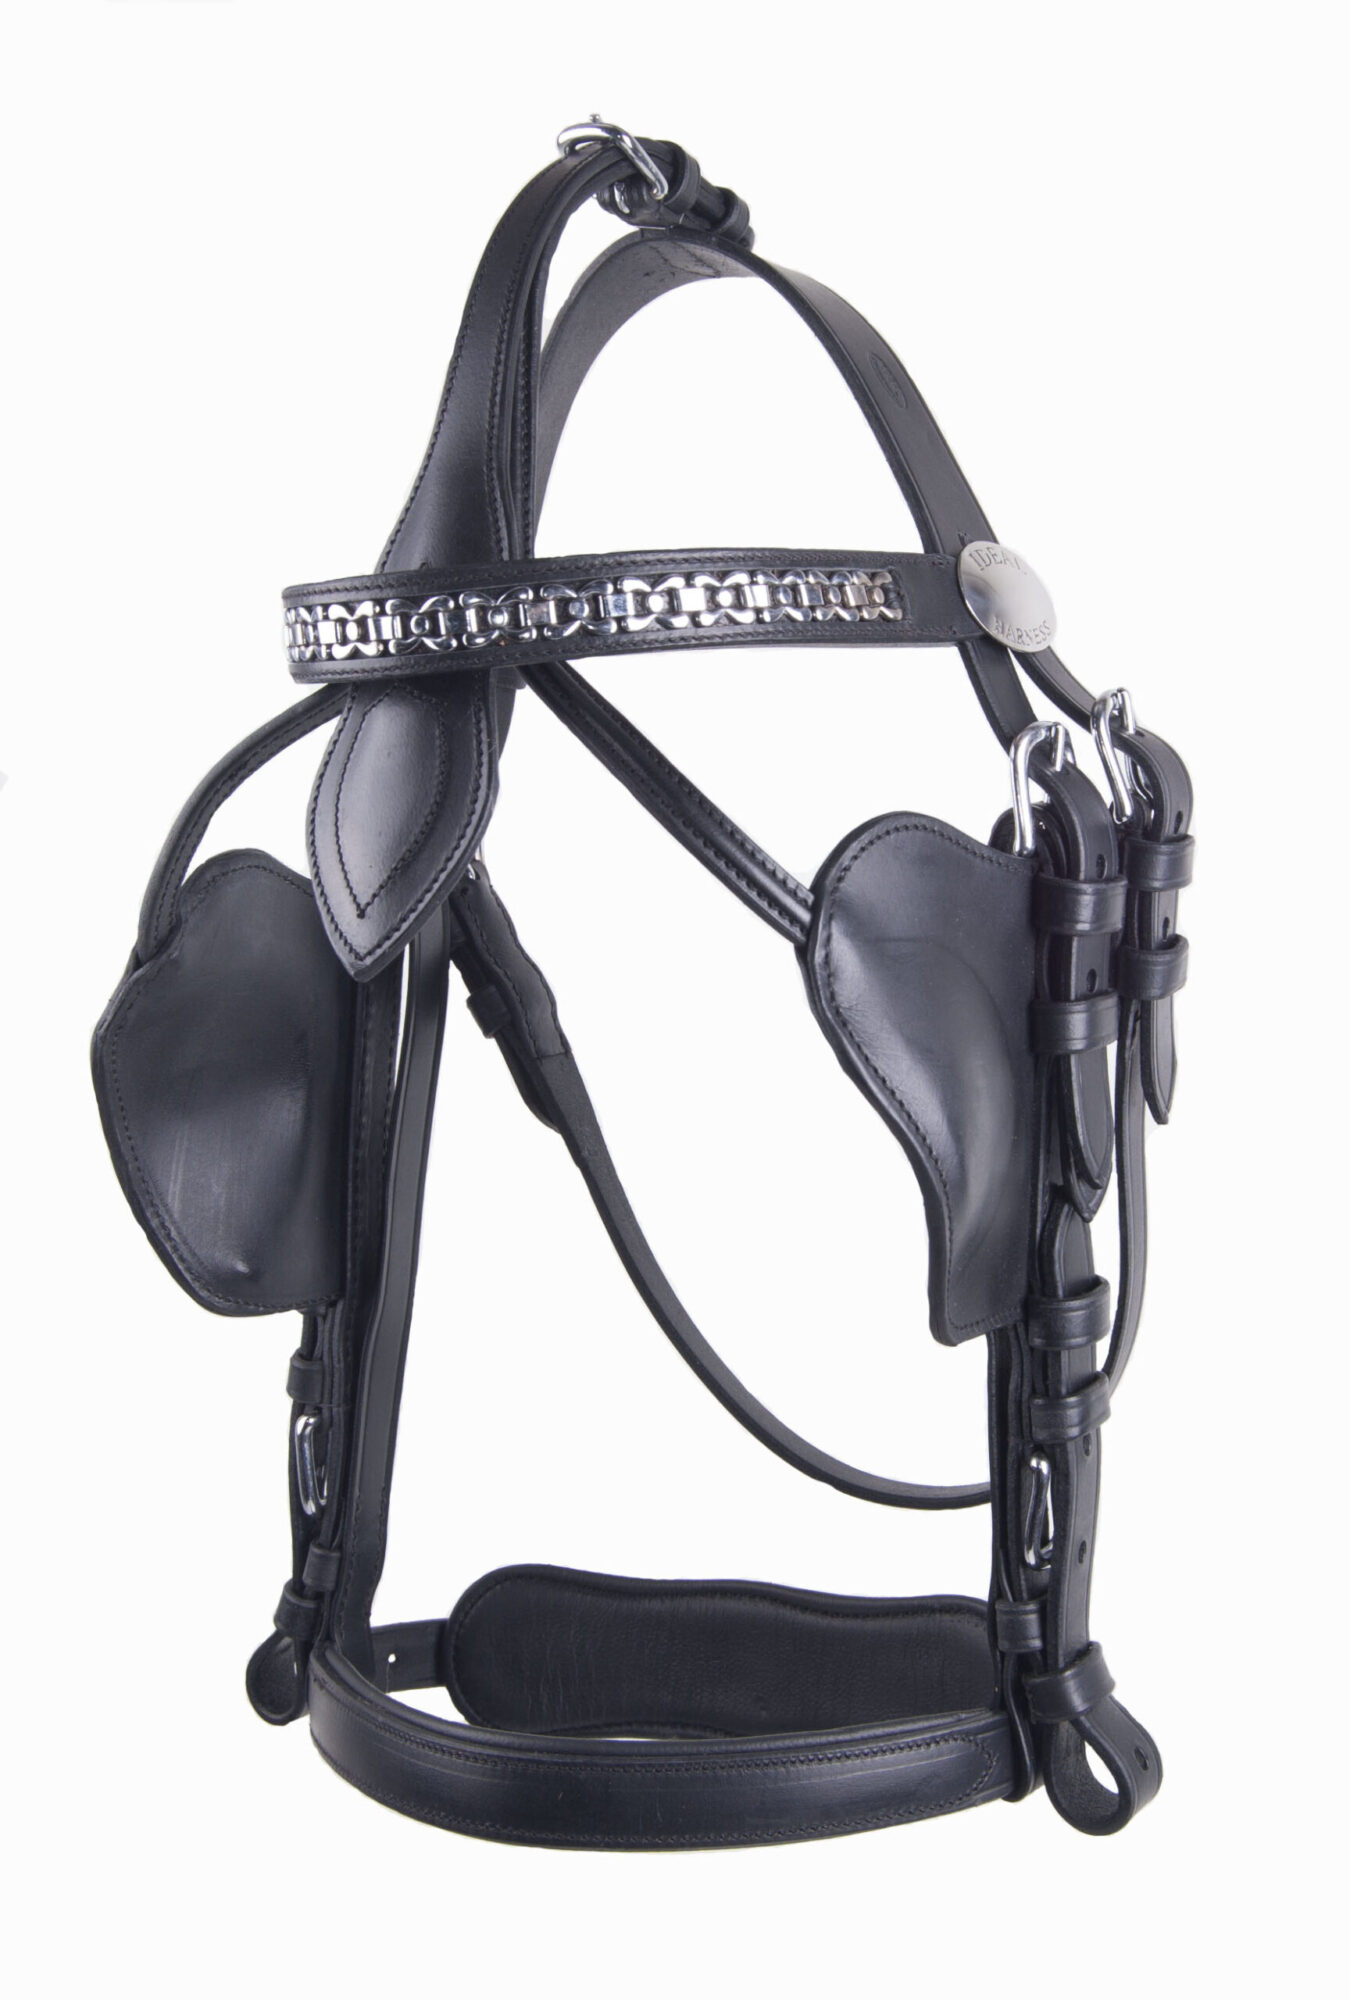 Bridle LUXE Ideal Equestrian-1192